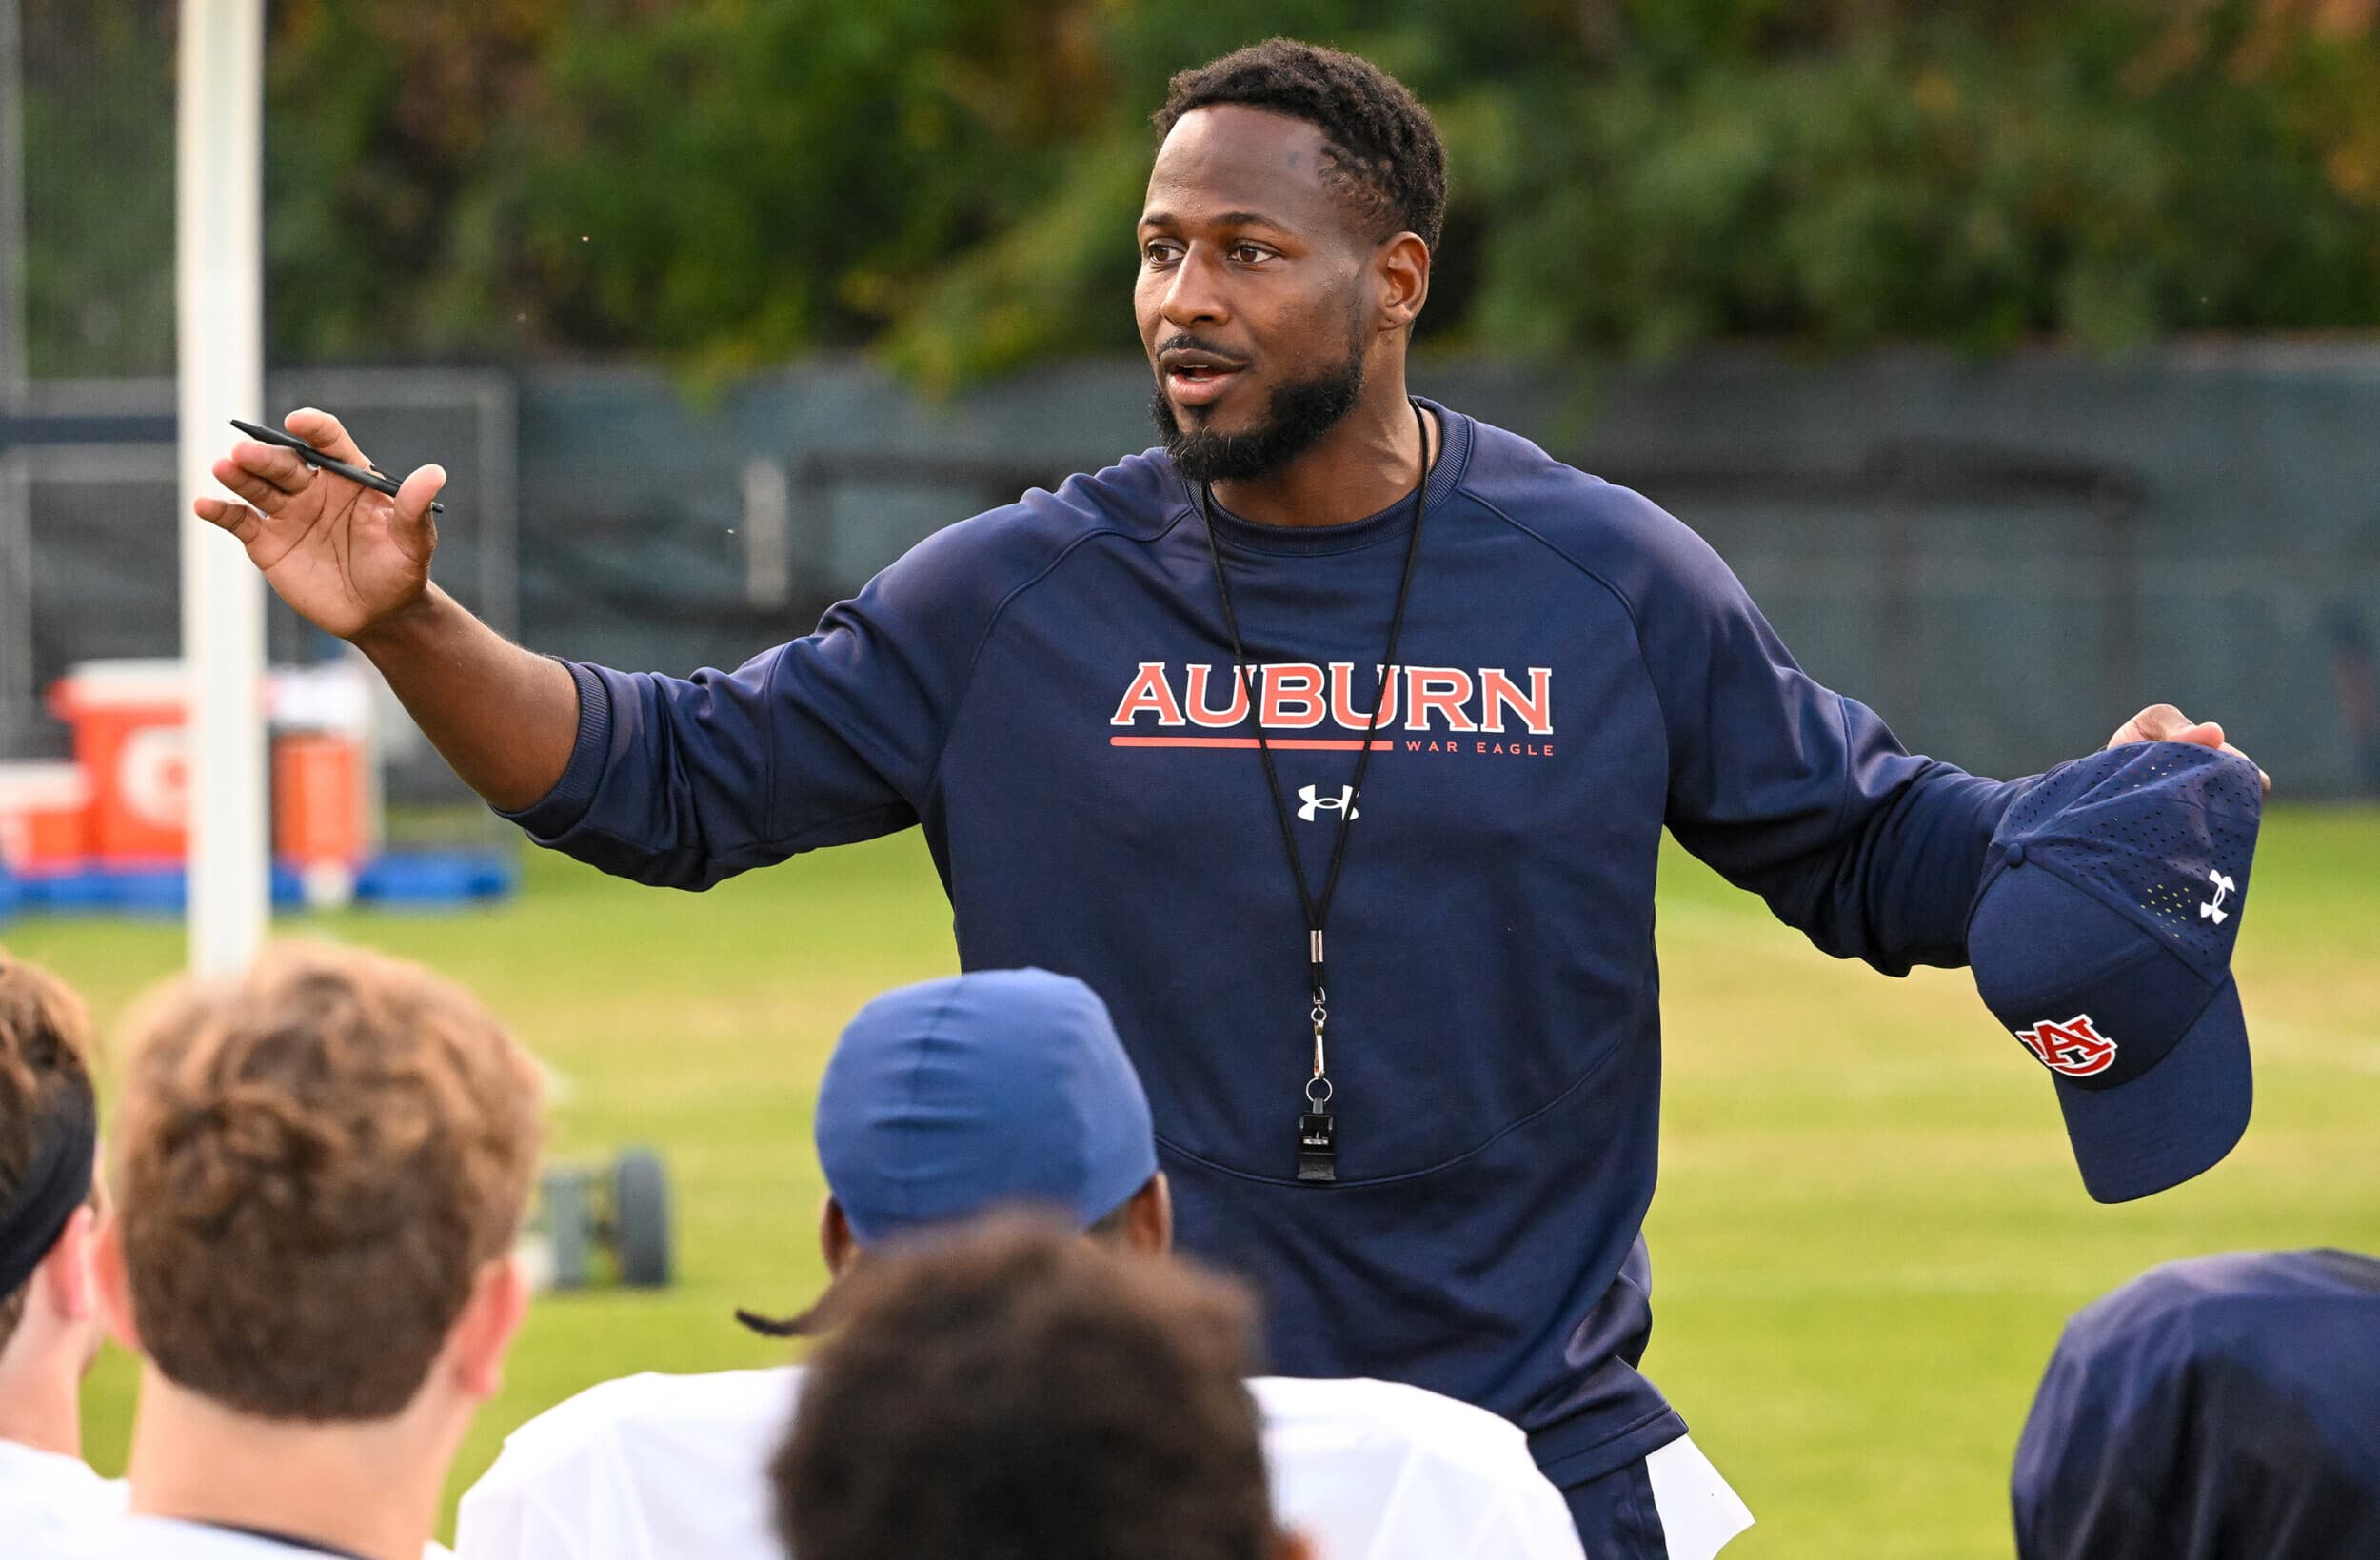 Auburn prepares for first game under Cadillac; Interim coach hopes to 'play  hard, compete'